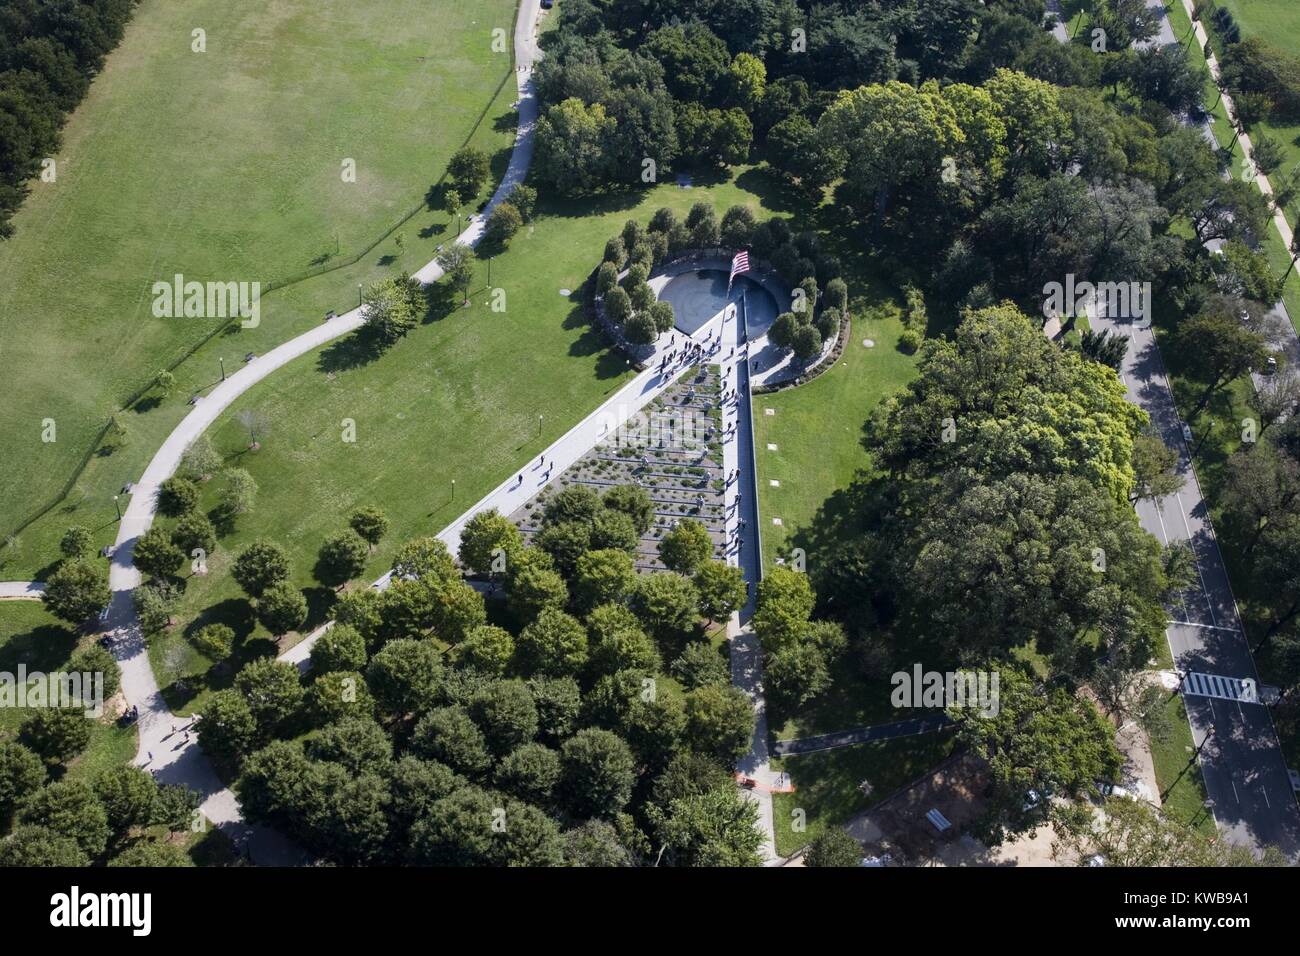 Aerial view of the Korean War Memorial, Washington, D.C. The memorial is in the form of a triangle intersecting a circle with an engraved granite wall on one side. It was dedicated on July 27, 1995. (BSLOC 2014 11 278) Stock Photo